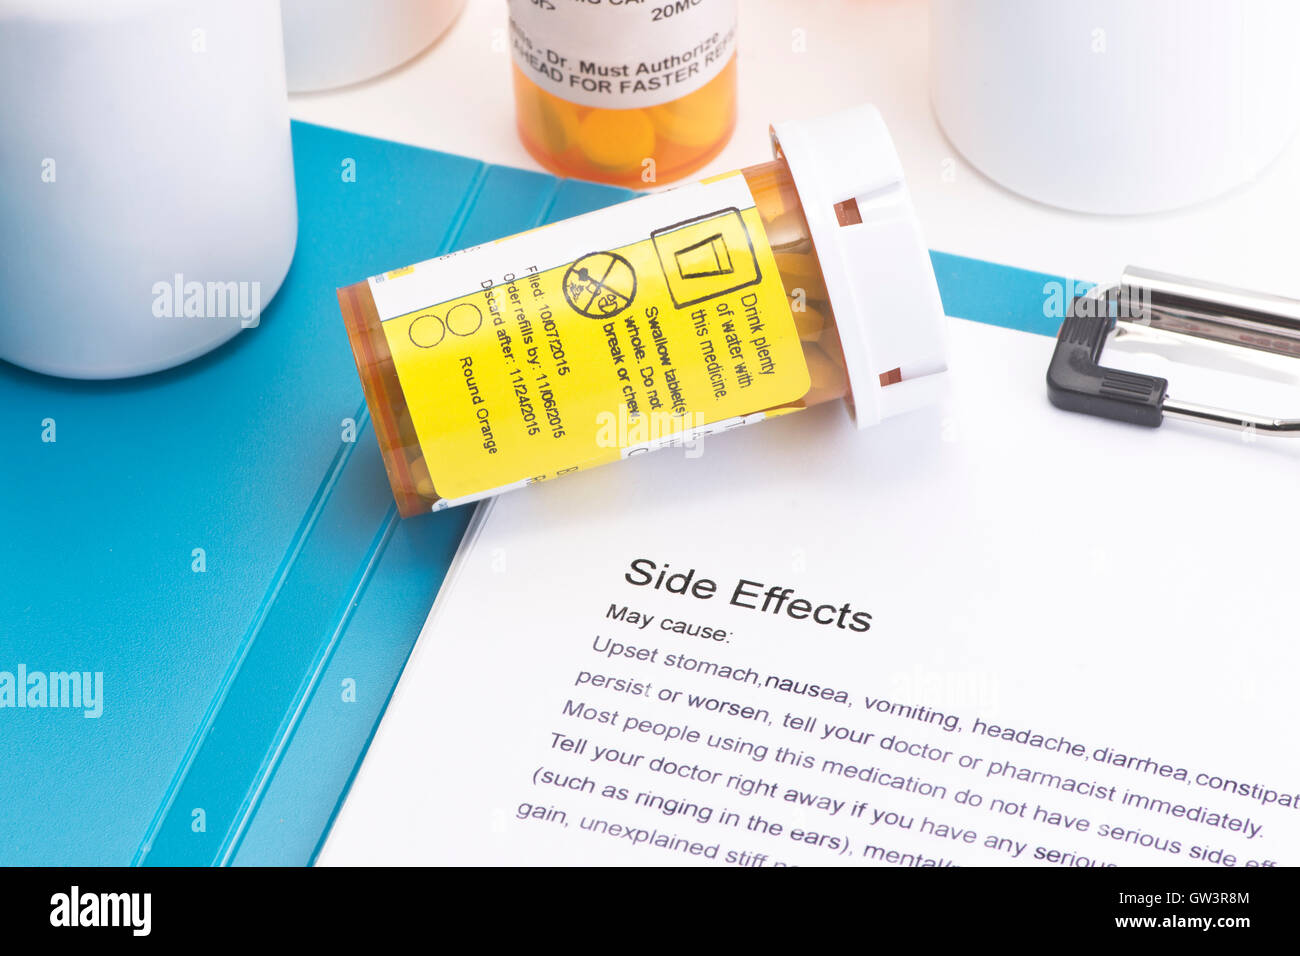 Prescription bottle with directions for use.  Labels and document are created by photographer. Stock Photo